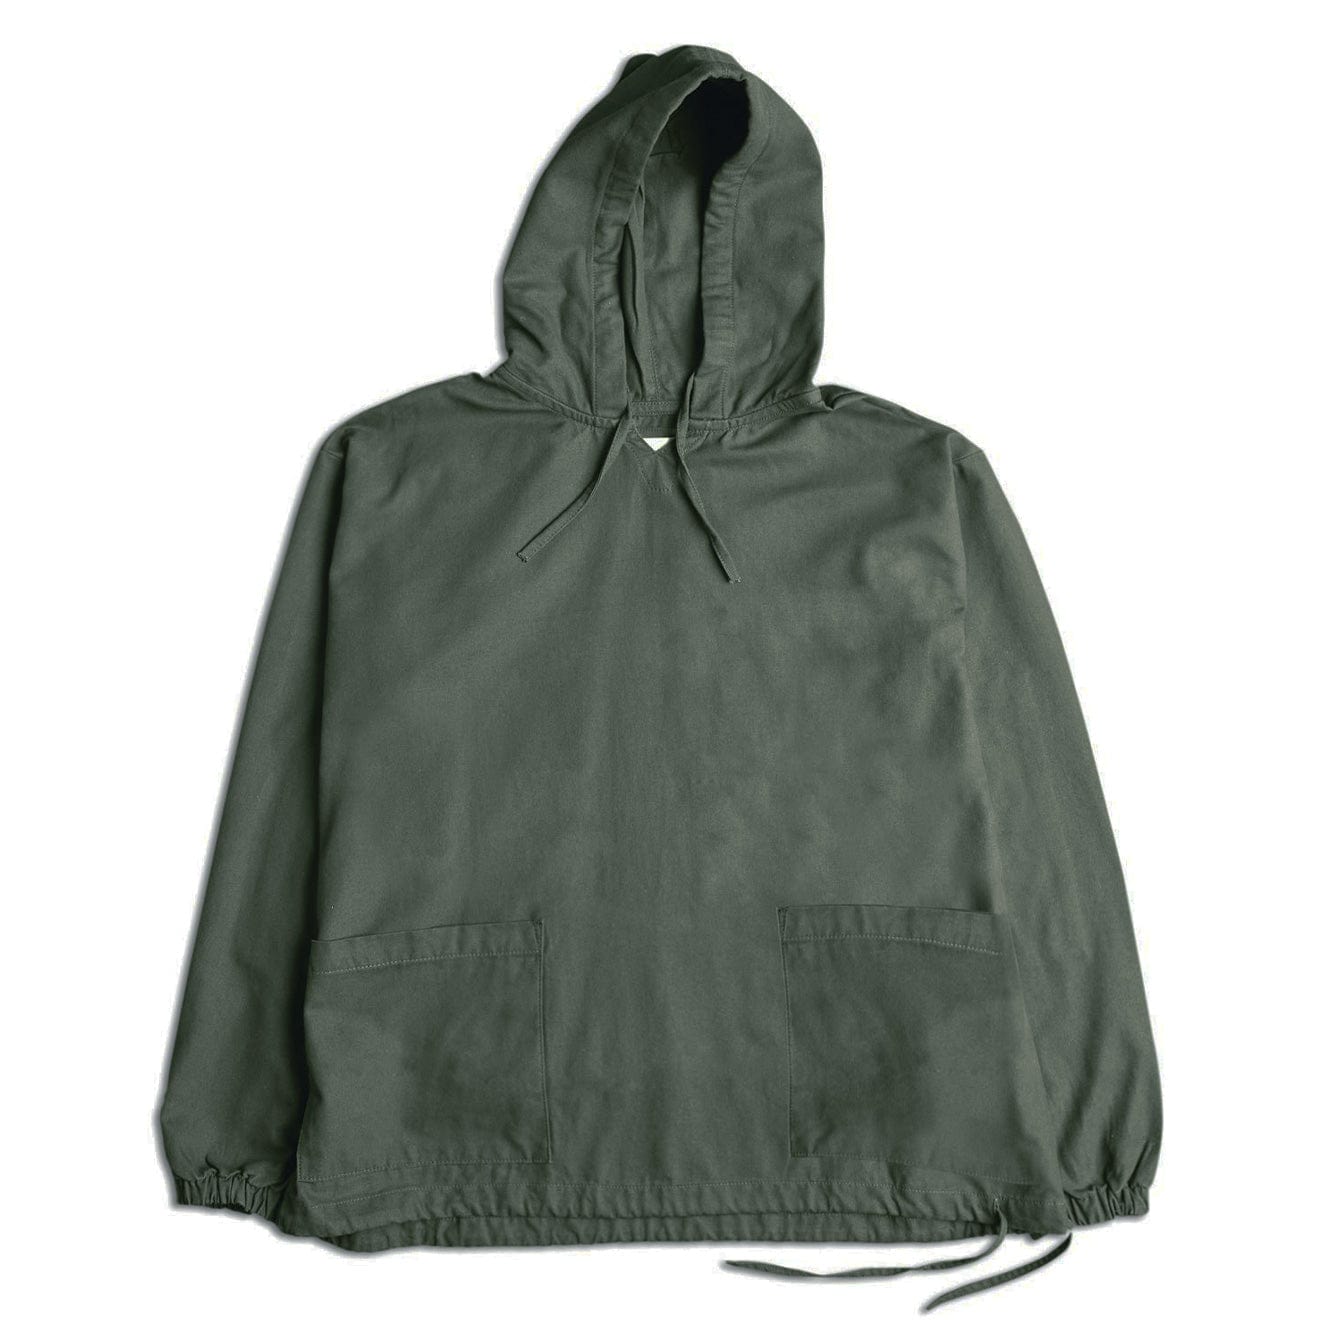 Uskees 3008 Organic Smock Vine Green | The Sporting Lodge